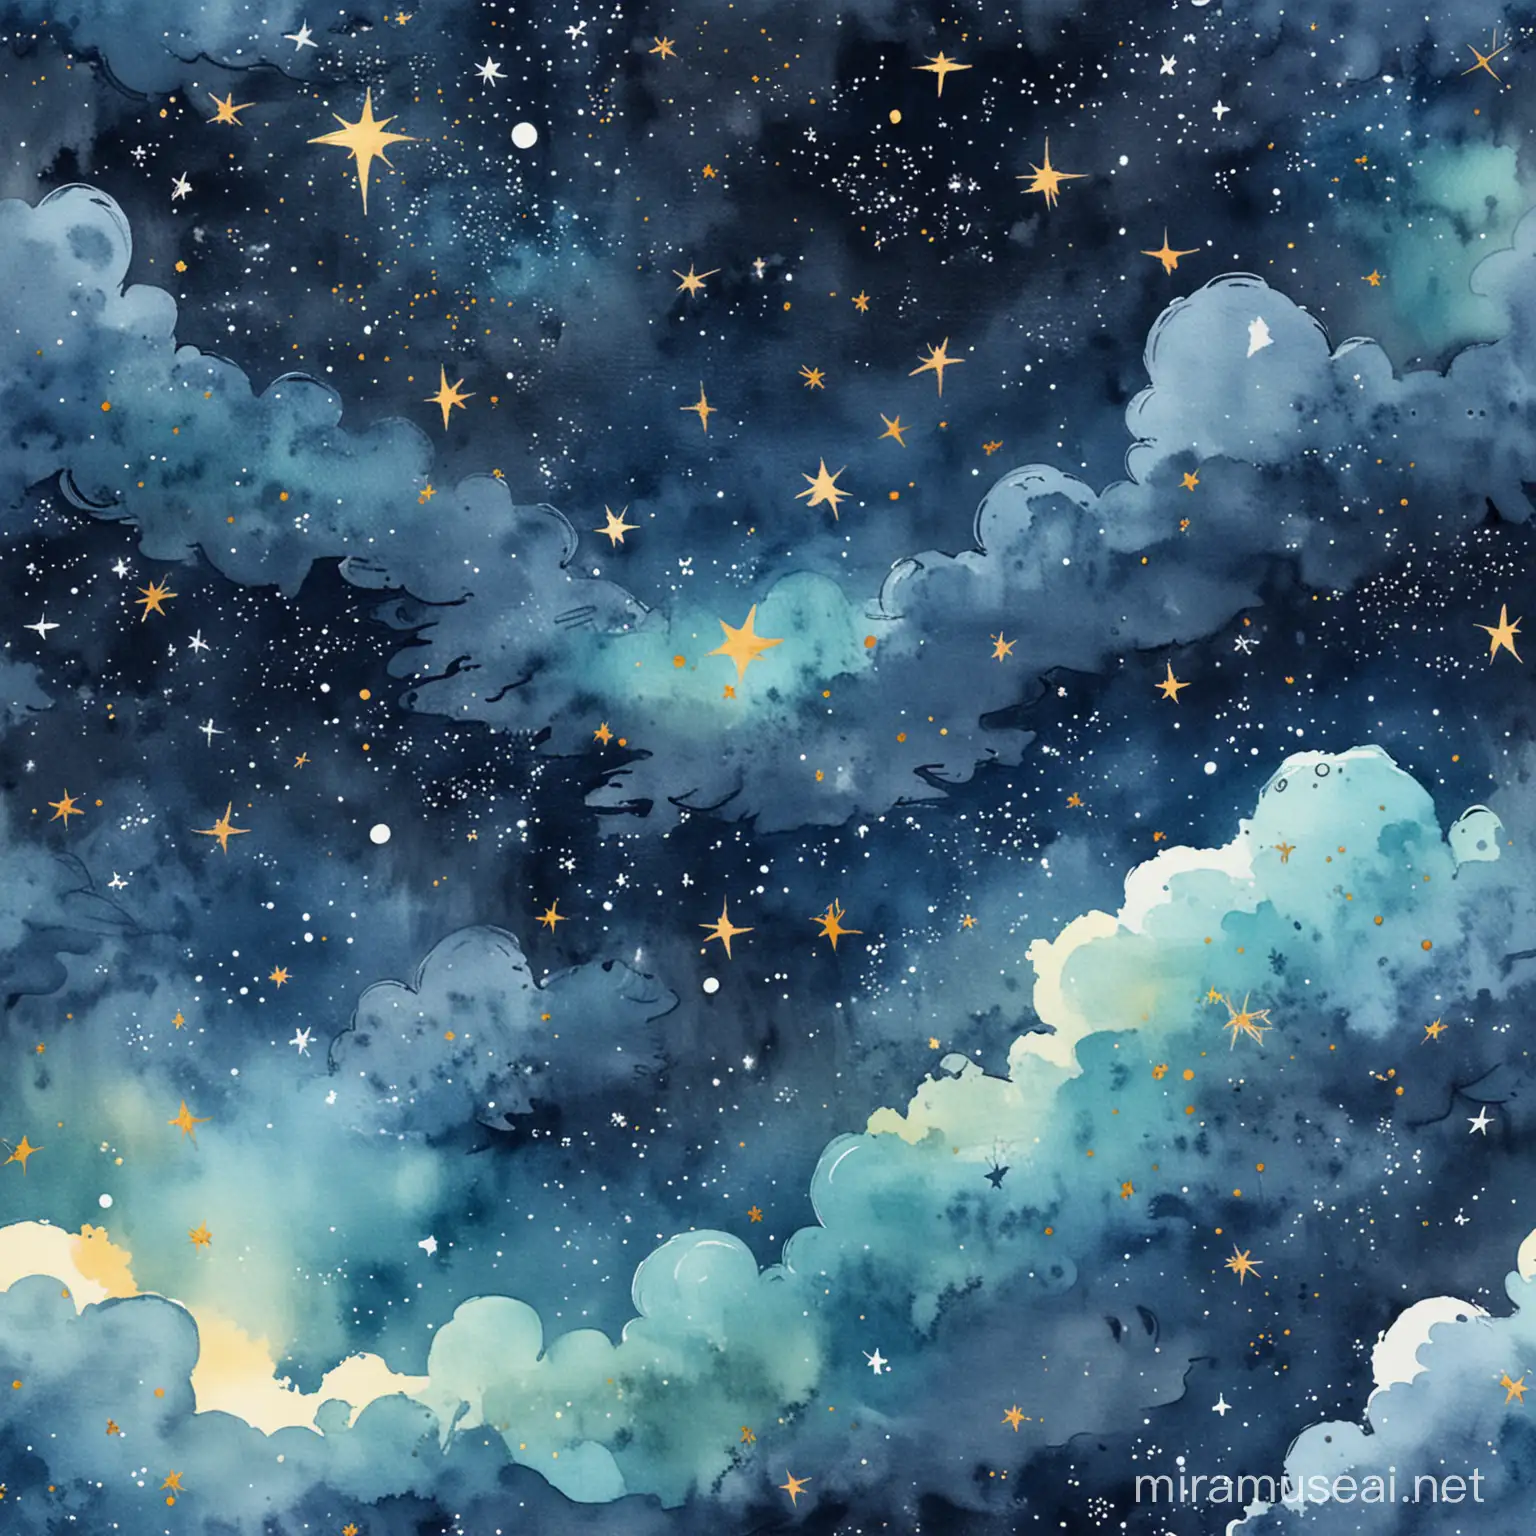 watercolor and whimsical starry night sky background